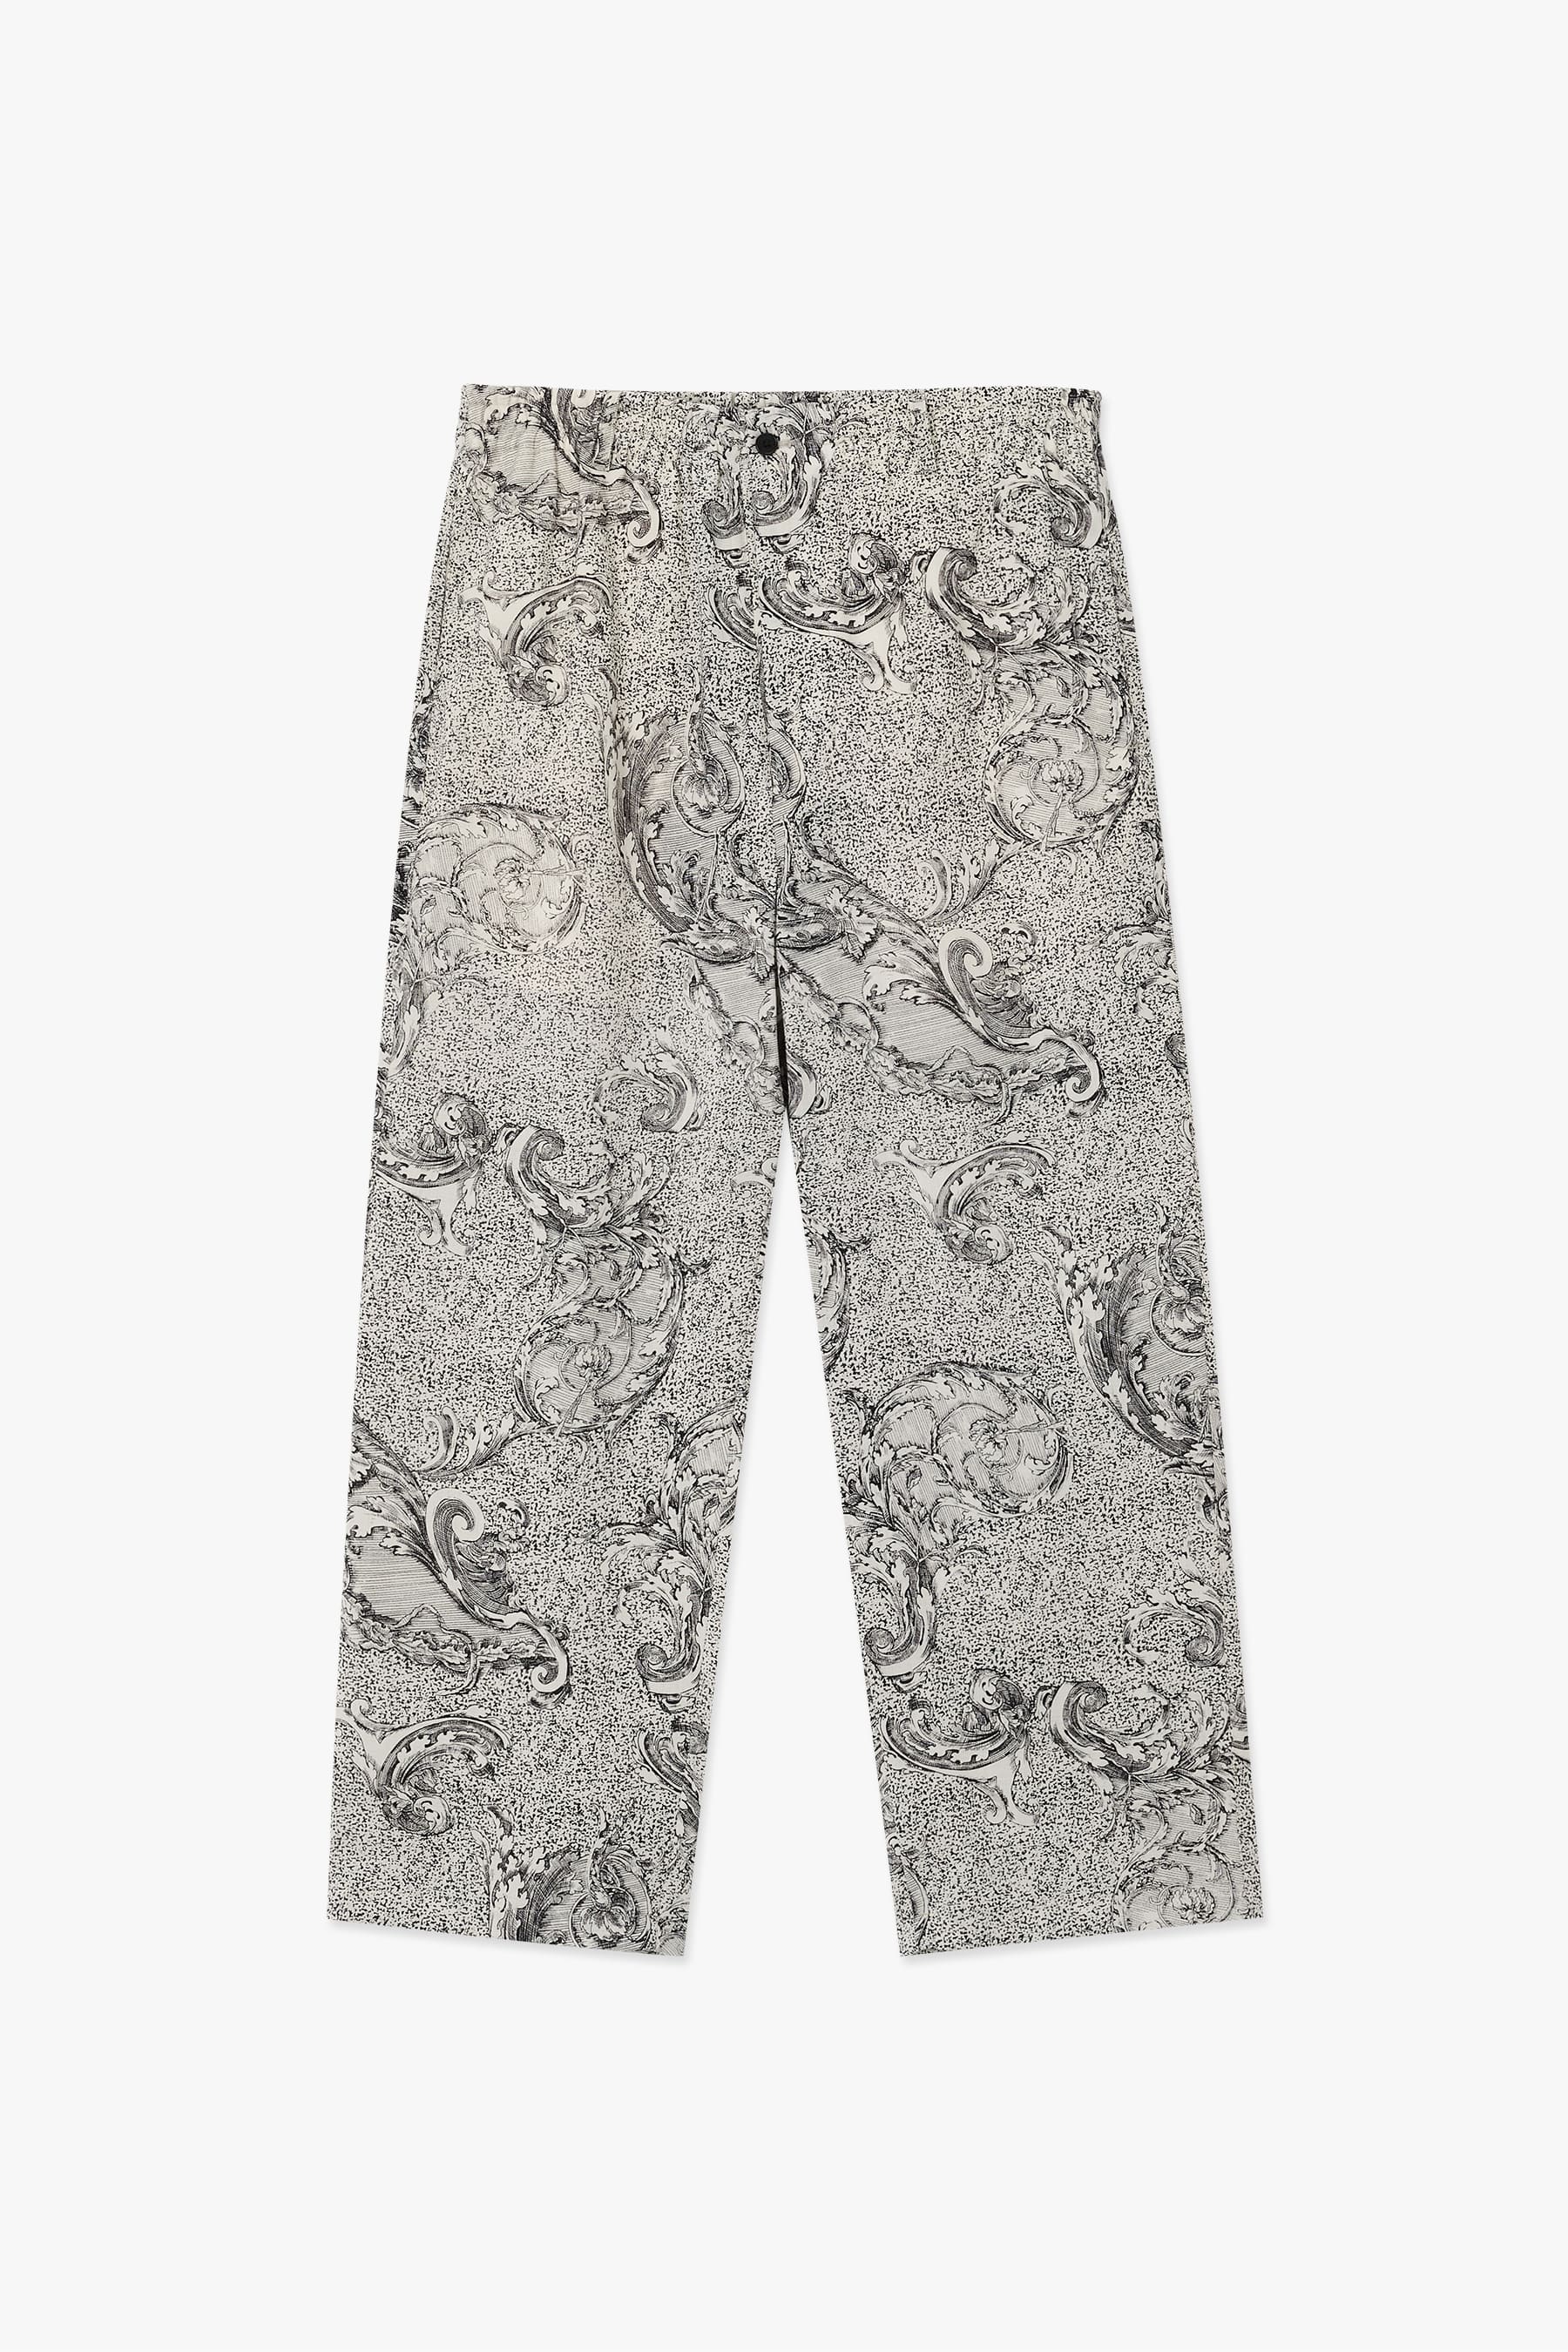 IVORY PAISLEY CROQUIS SILK FINISHED BANDING WIDE PANTS